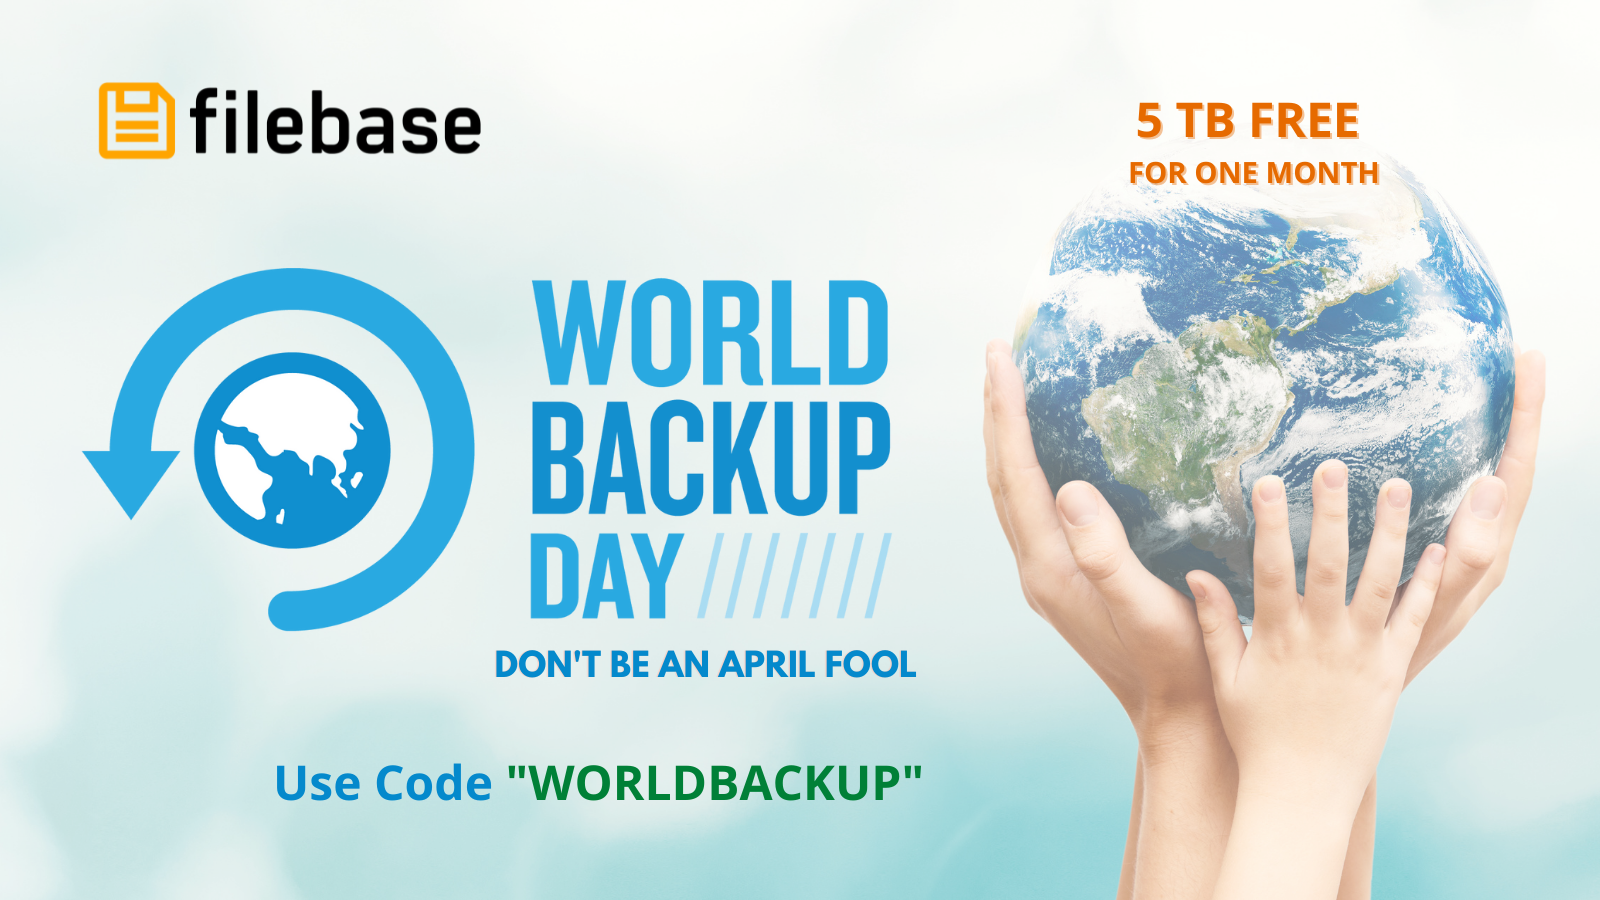 Celebrate World Backup Day 2022 with 5TB free from Filebase!